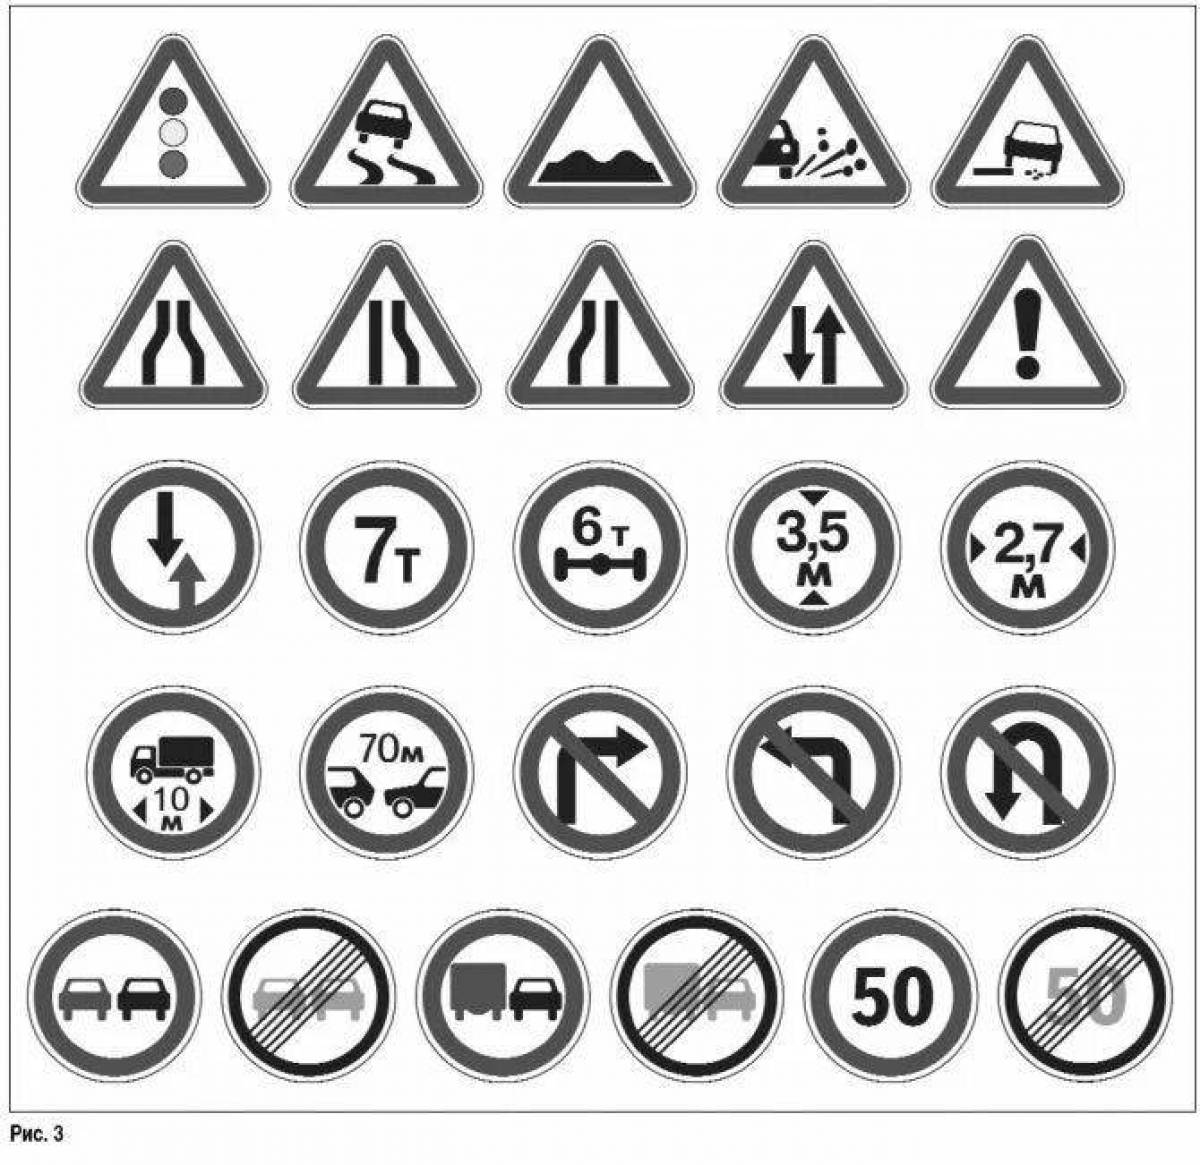 Fascinating traffic signs coloring page